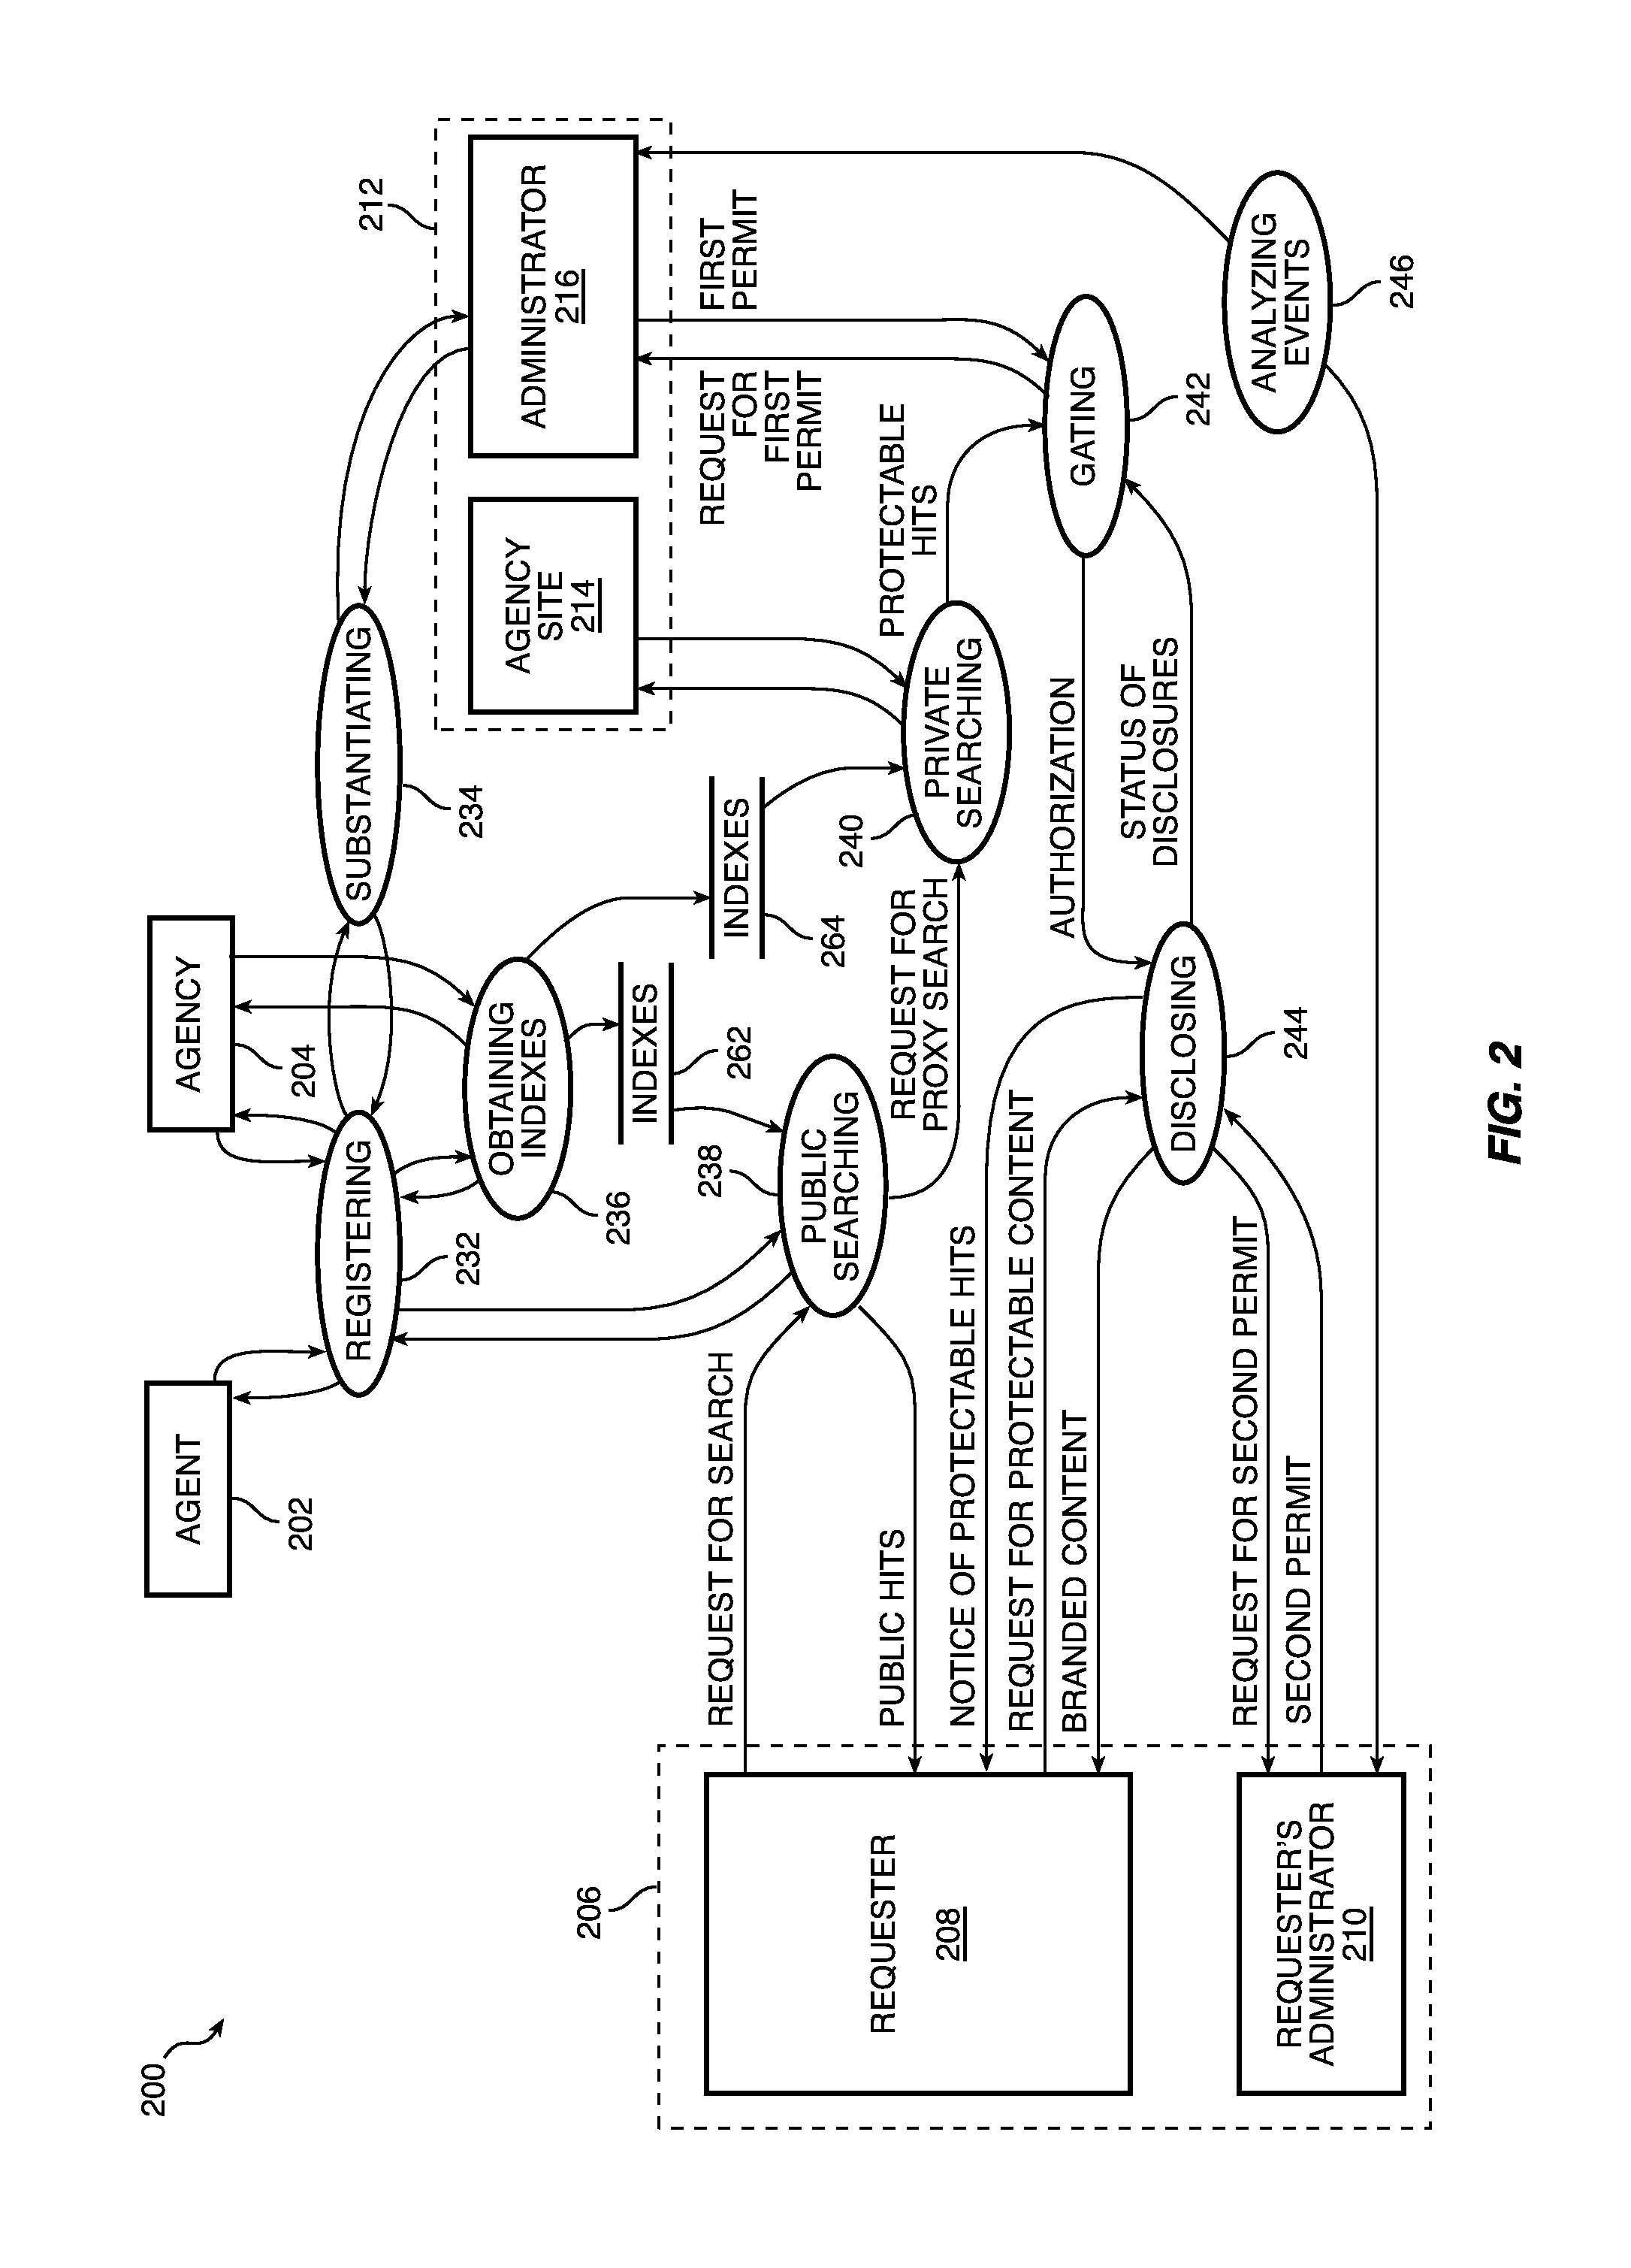 Systems and methods for managing disclosure of protectable information